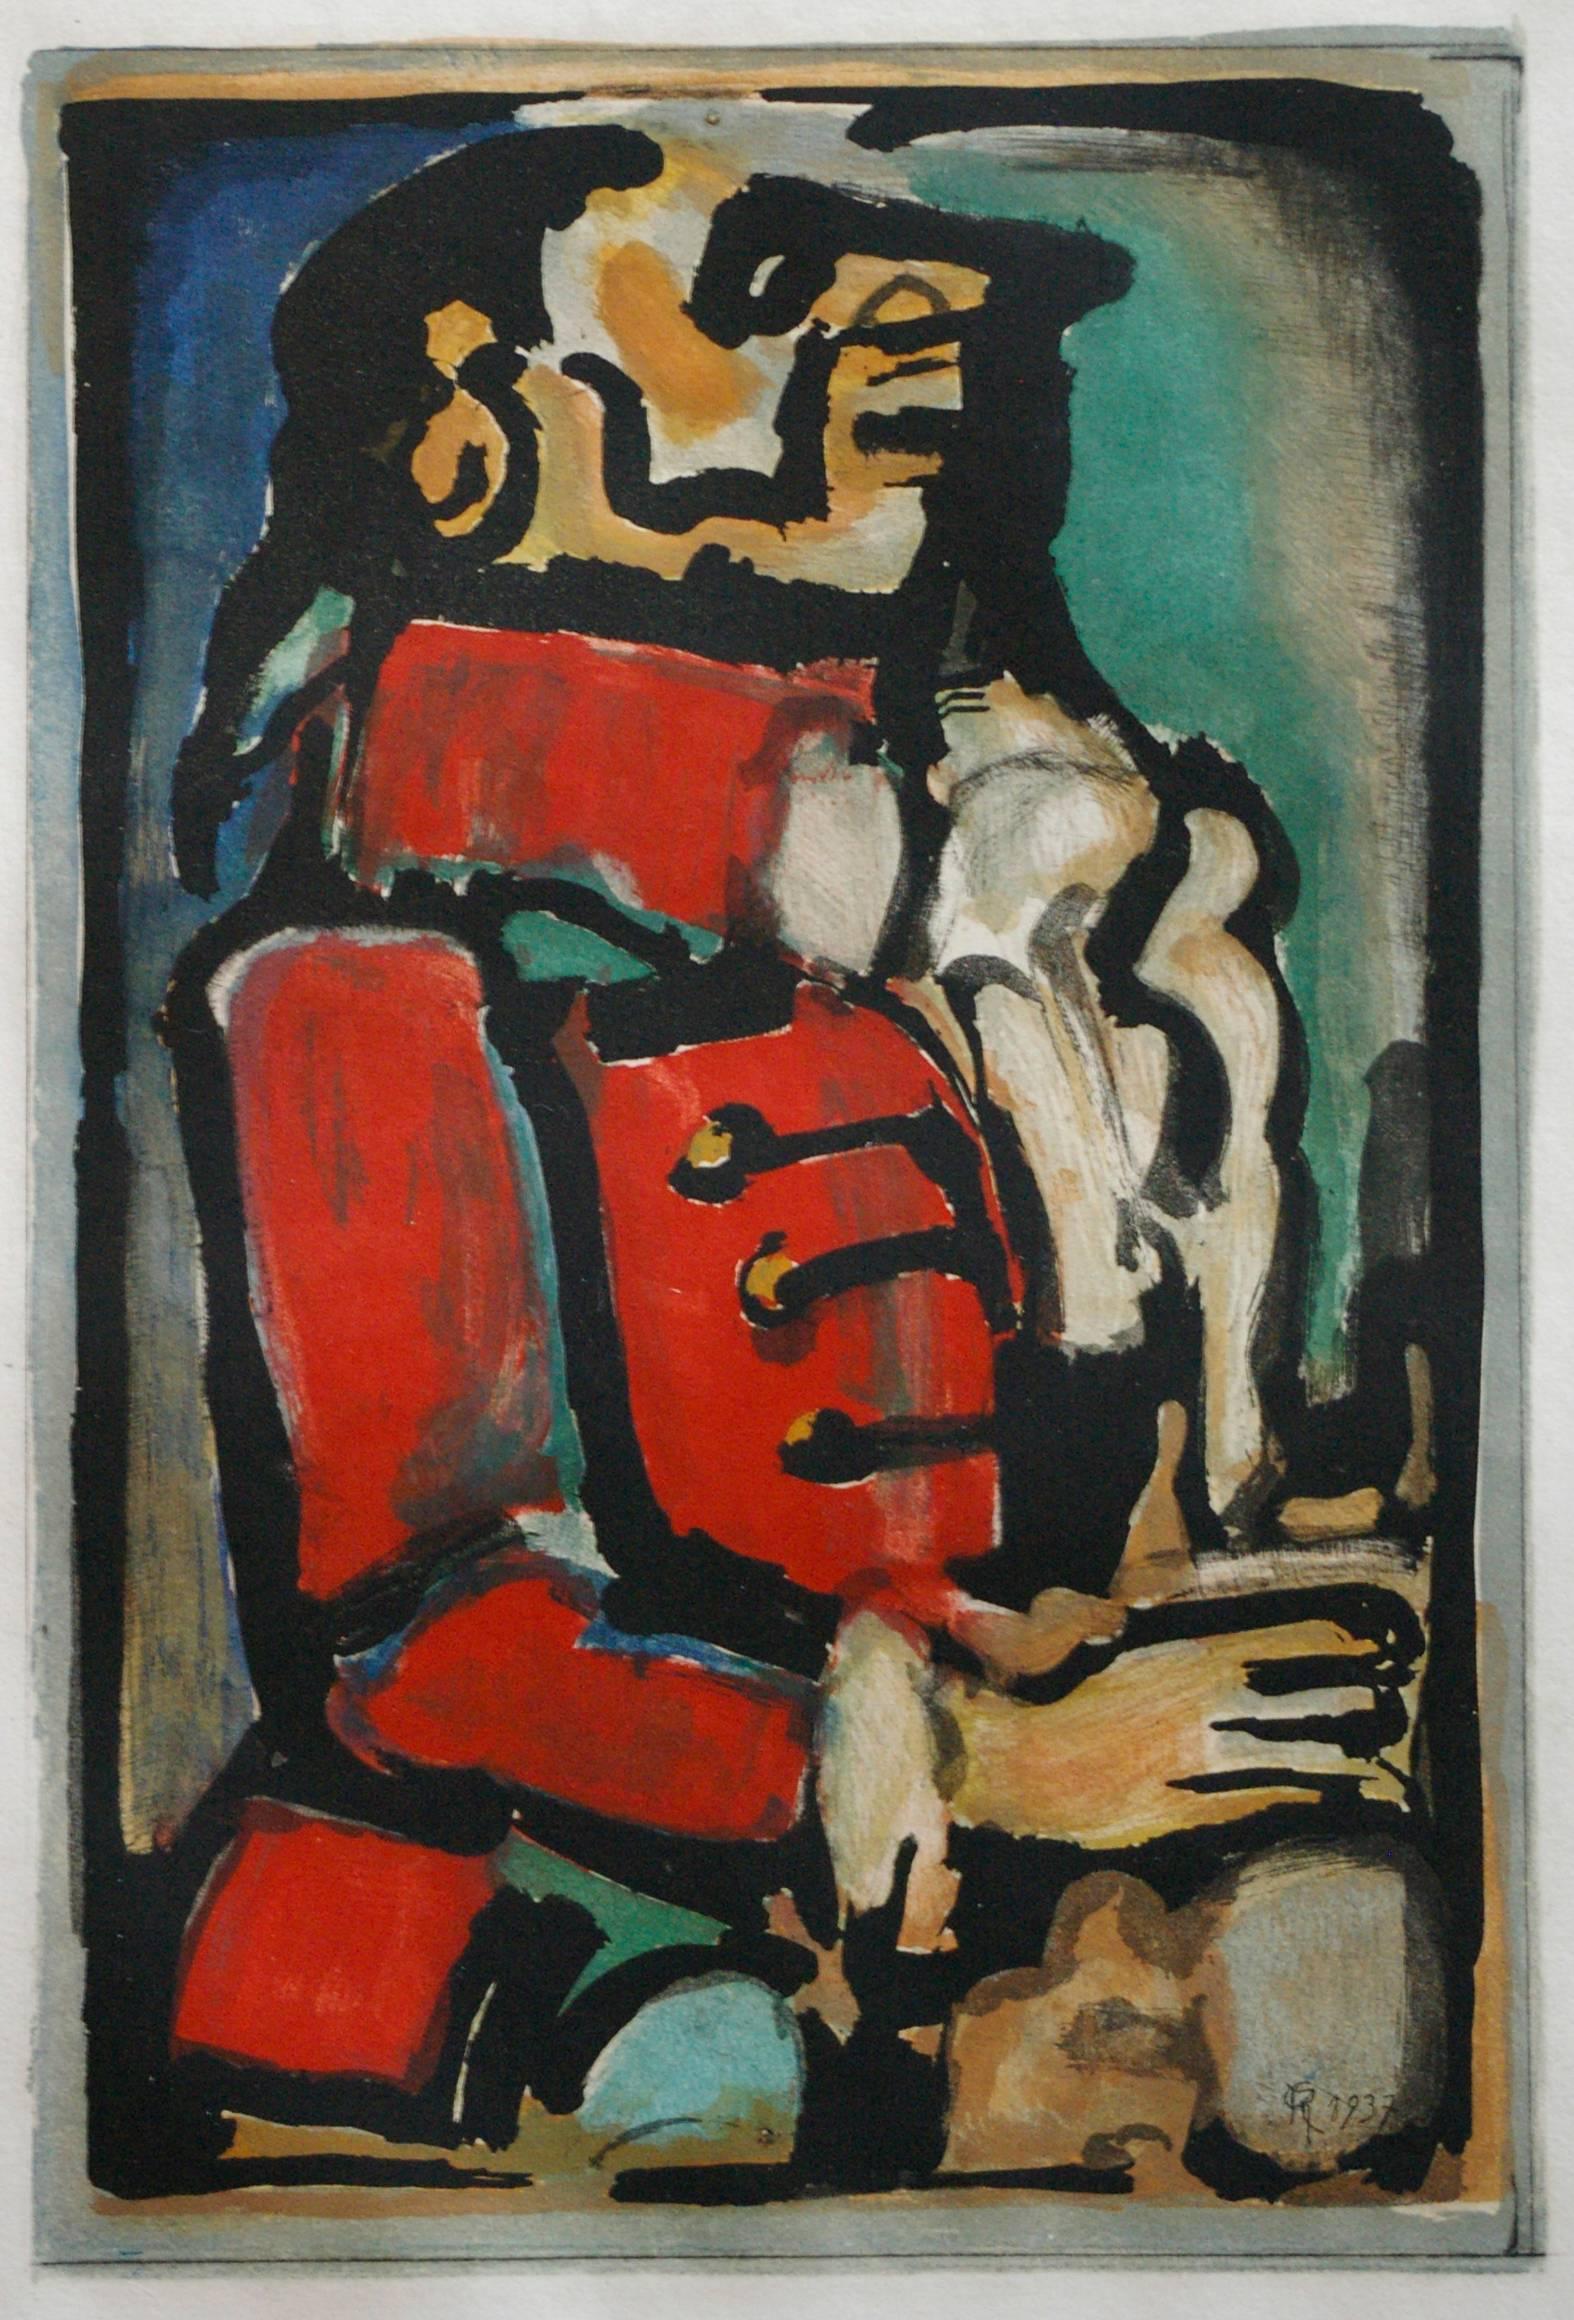 Passion - Print by Georges Rouault